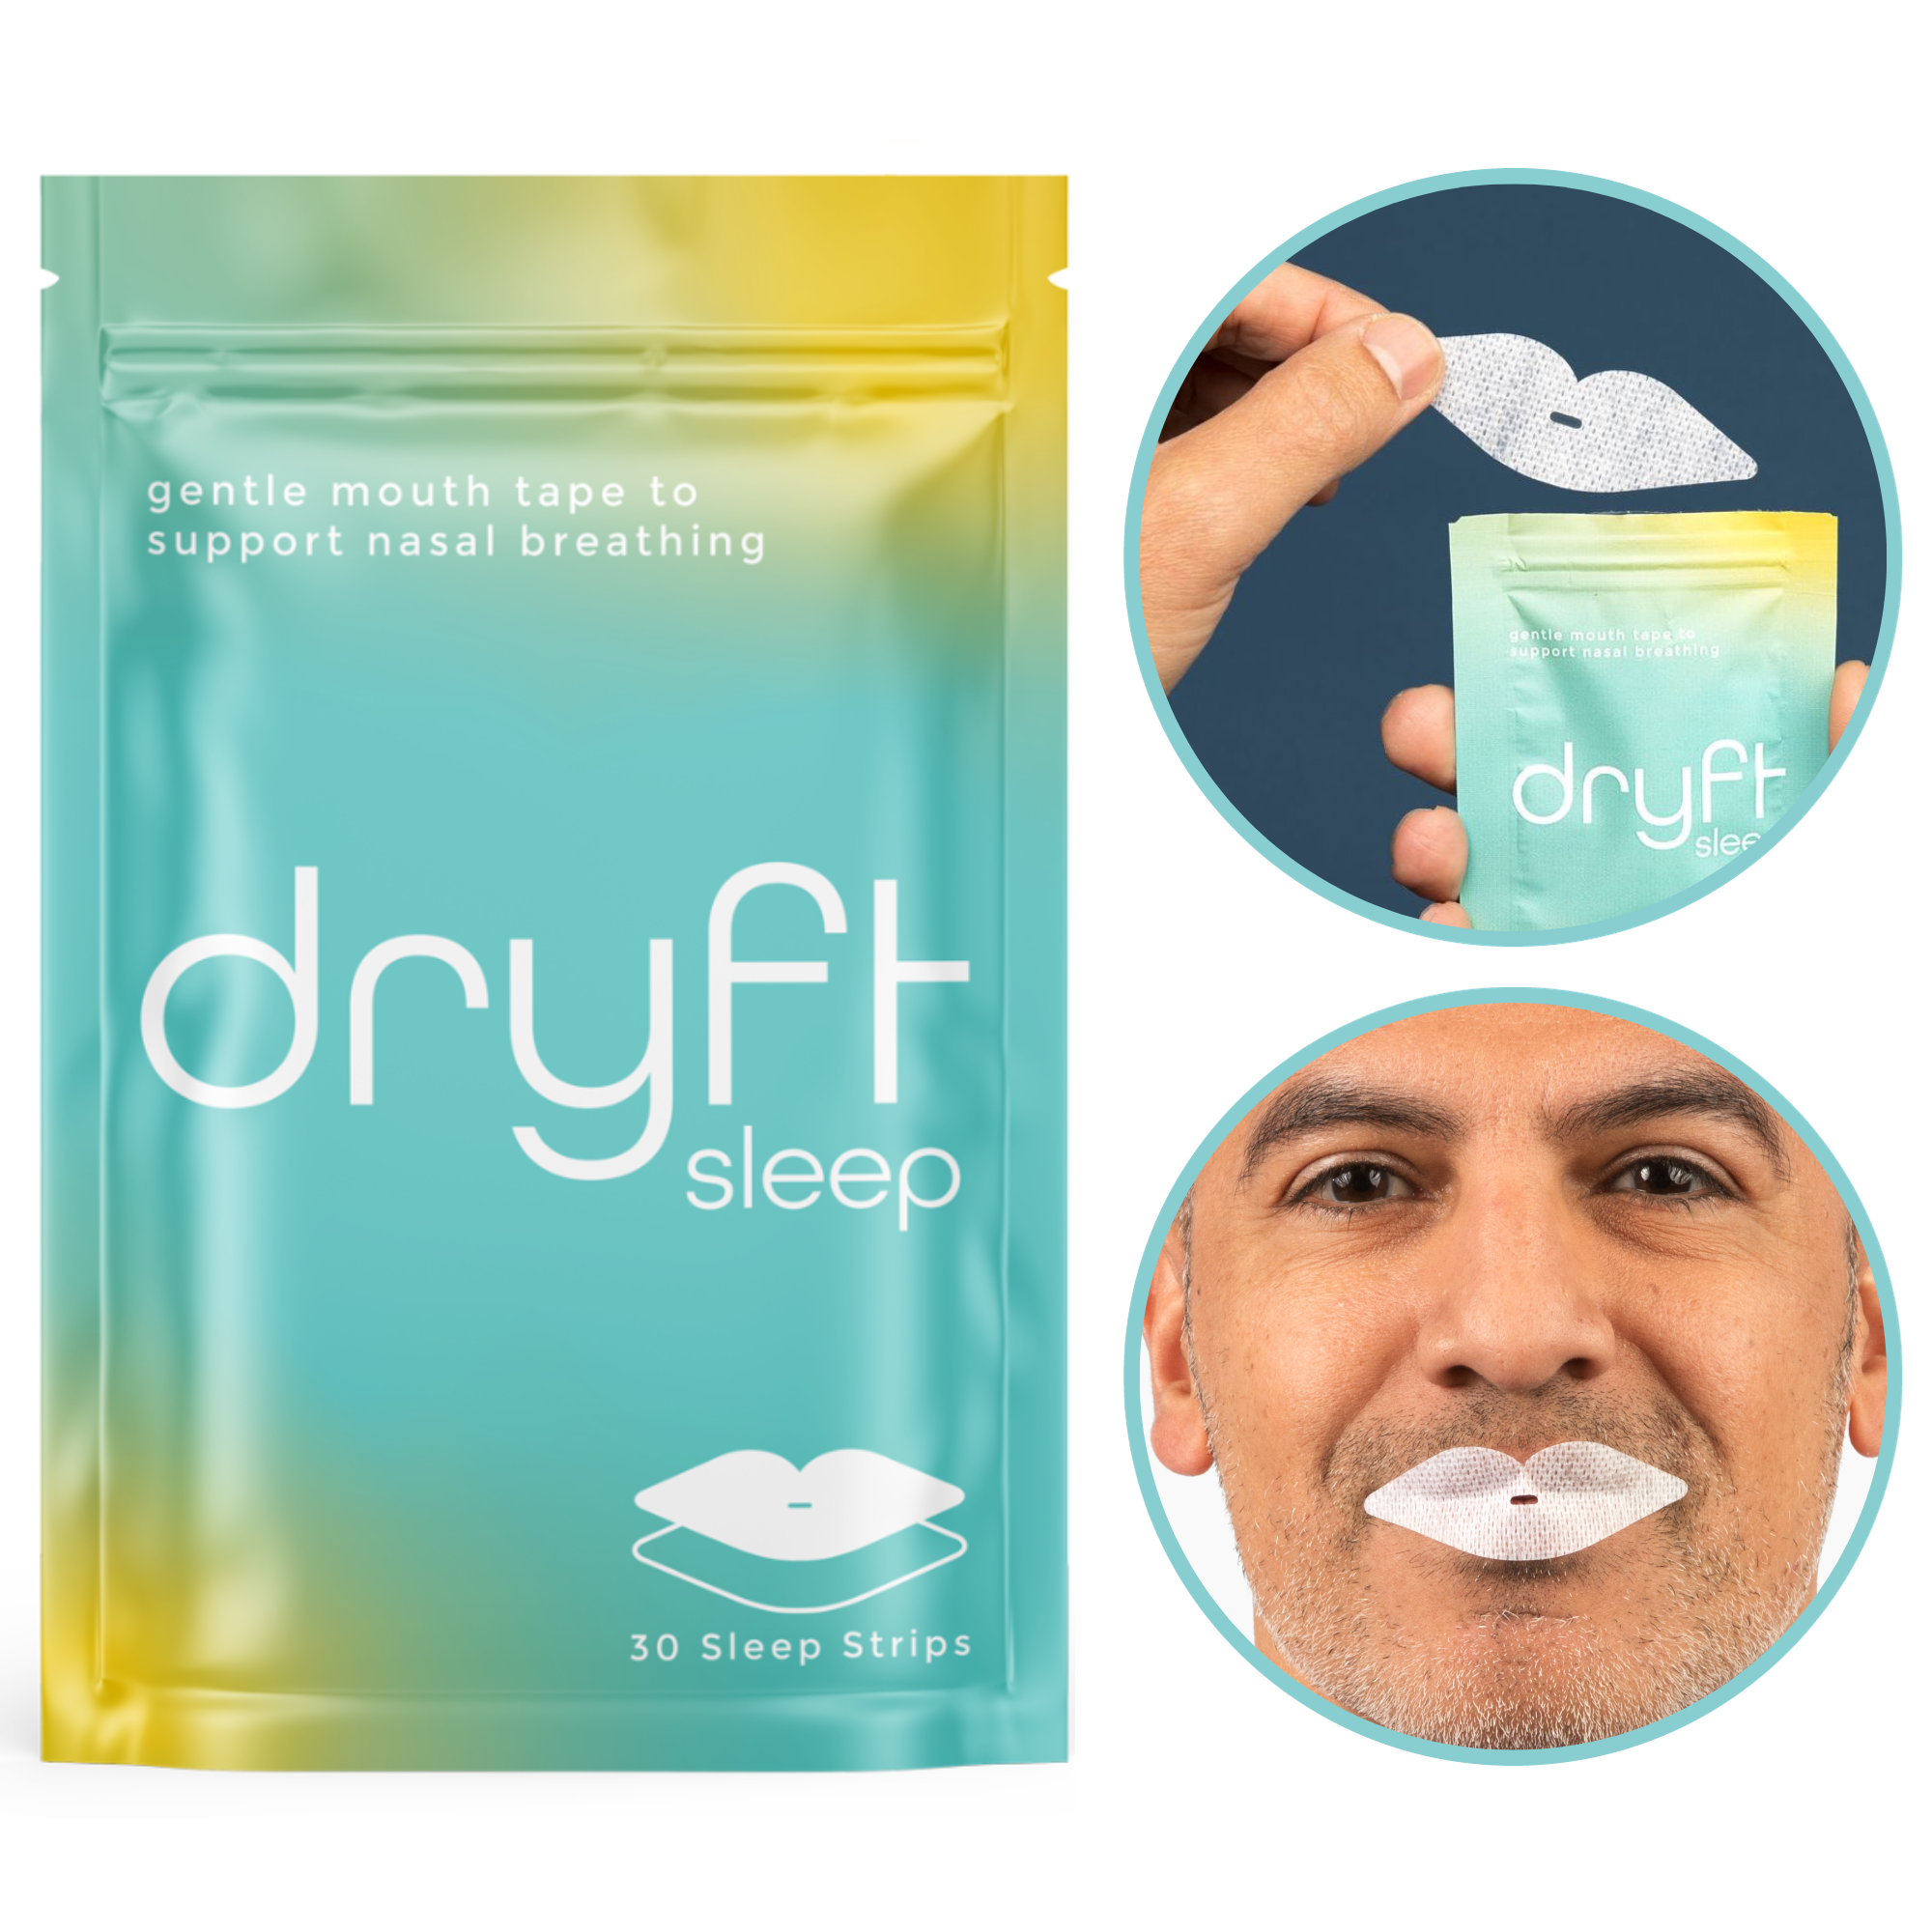 Dryft Sleep Mouth Tape (360 Pack)